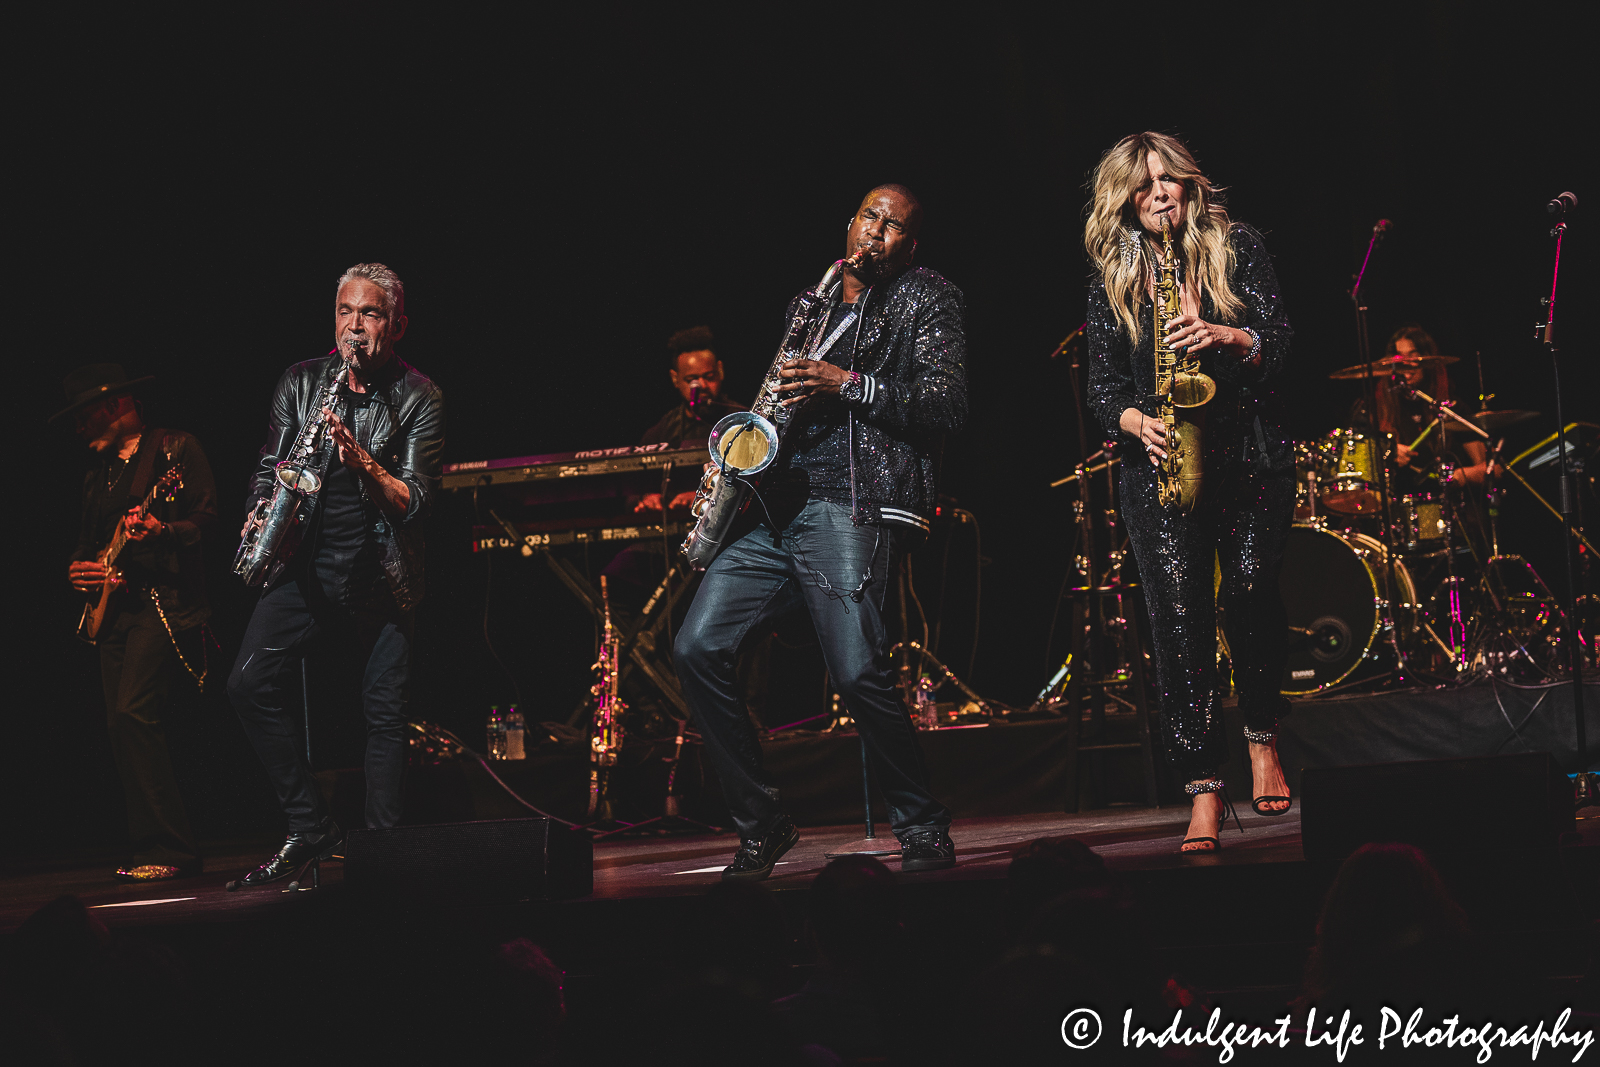 Dave Koz & Friends—Eric Darius and Candy Dulfer—performing live at Kauffman Center for the Performing Arts in downtown Kansas City, MO on July 15, 2023.